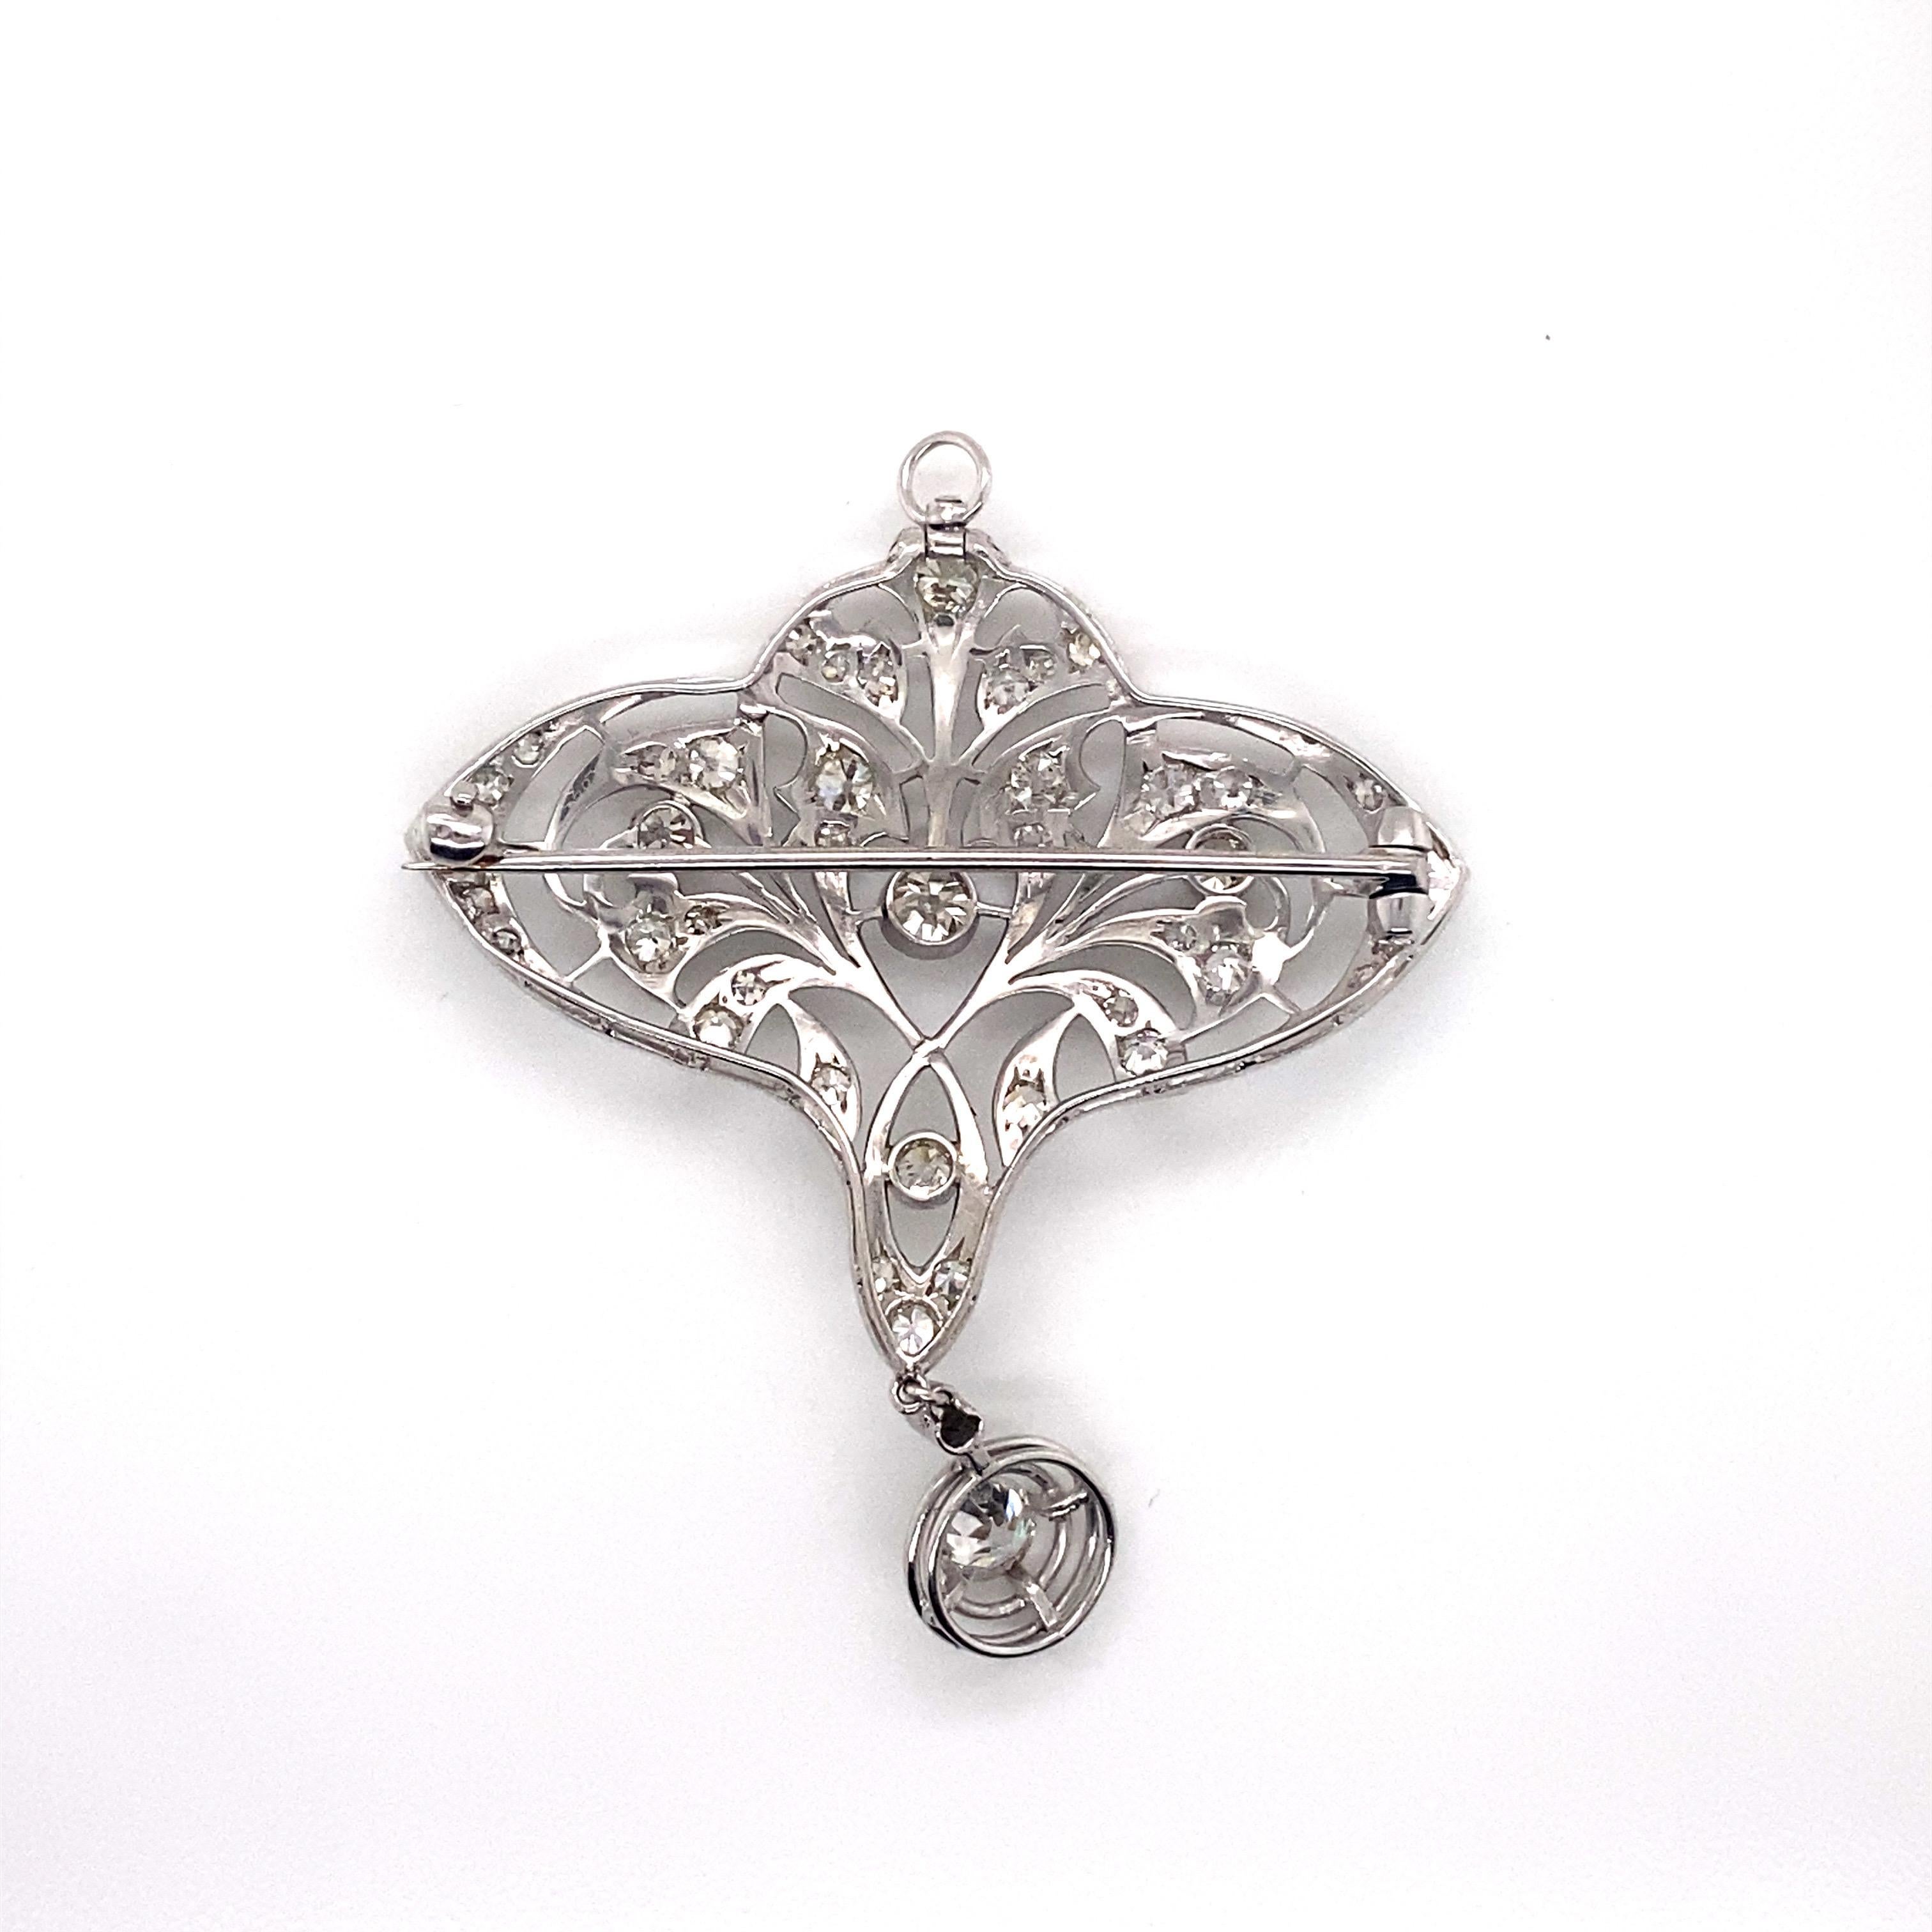 Antique Edwardian Period Platinum Filigree and Milgrain Diamond Brooch Pendant - The brooch is set with 42 Old European Cut diamonds with an approximate 1.90ct total weight. The diamond quality ranges from H - K color and VS1 - I1 clarity. The